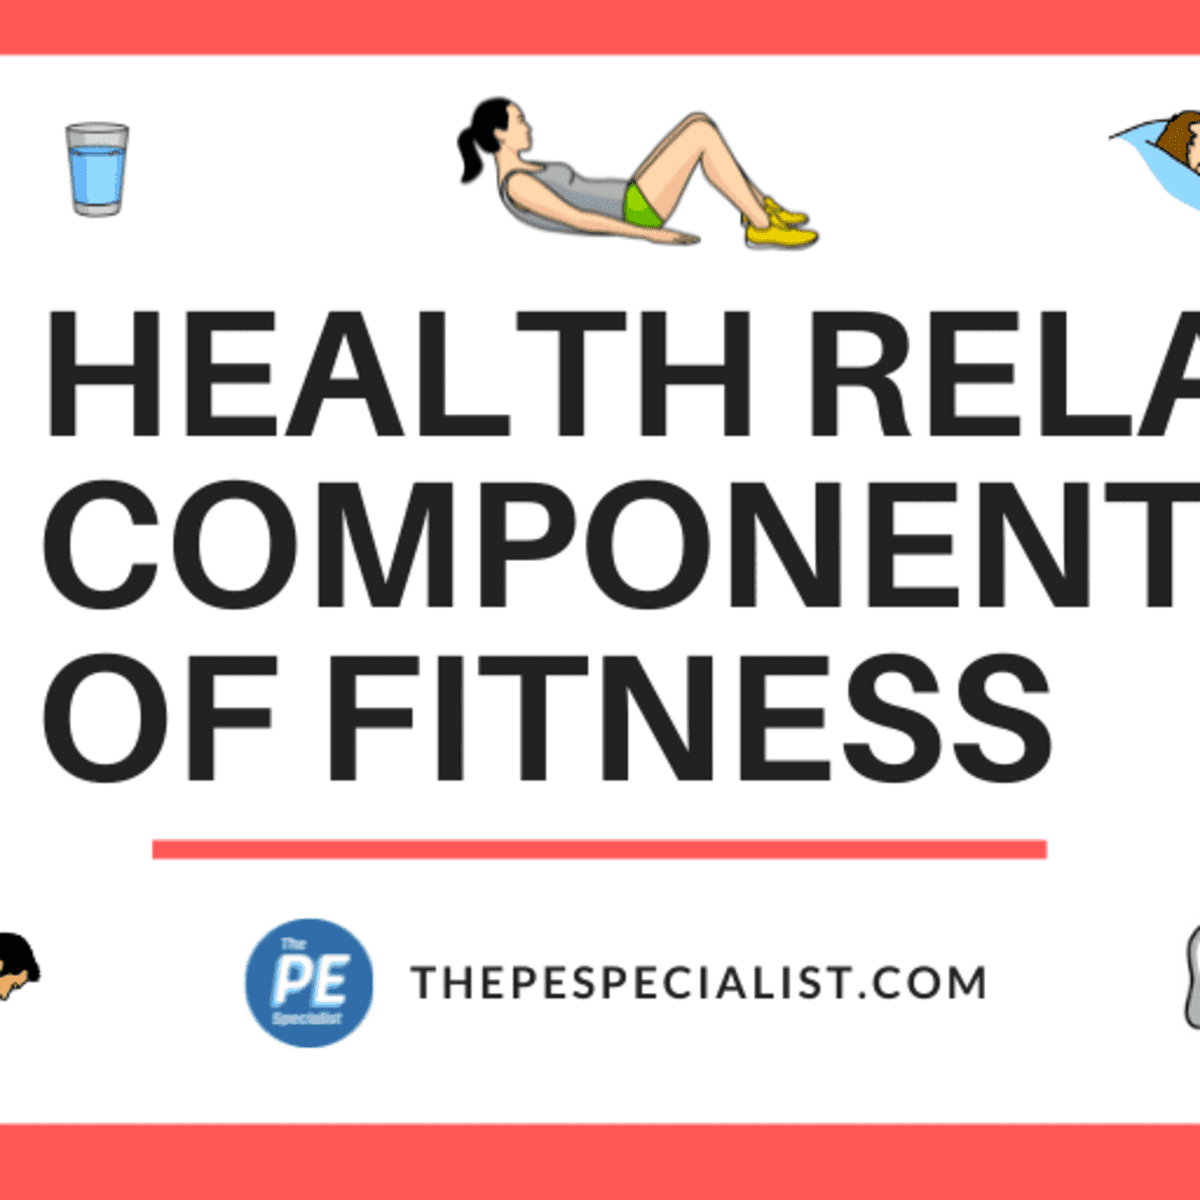 The 5 Health-Related Components of Fitness - Crunch